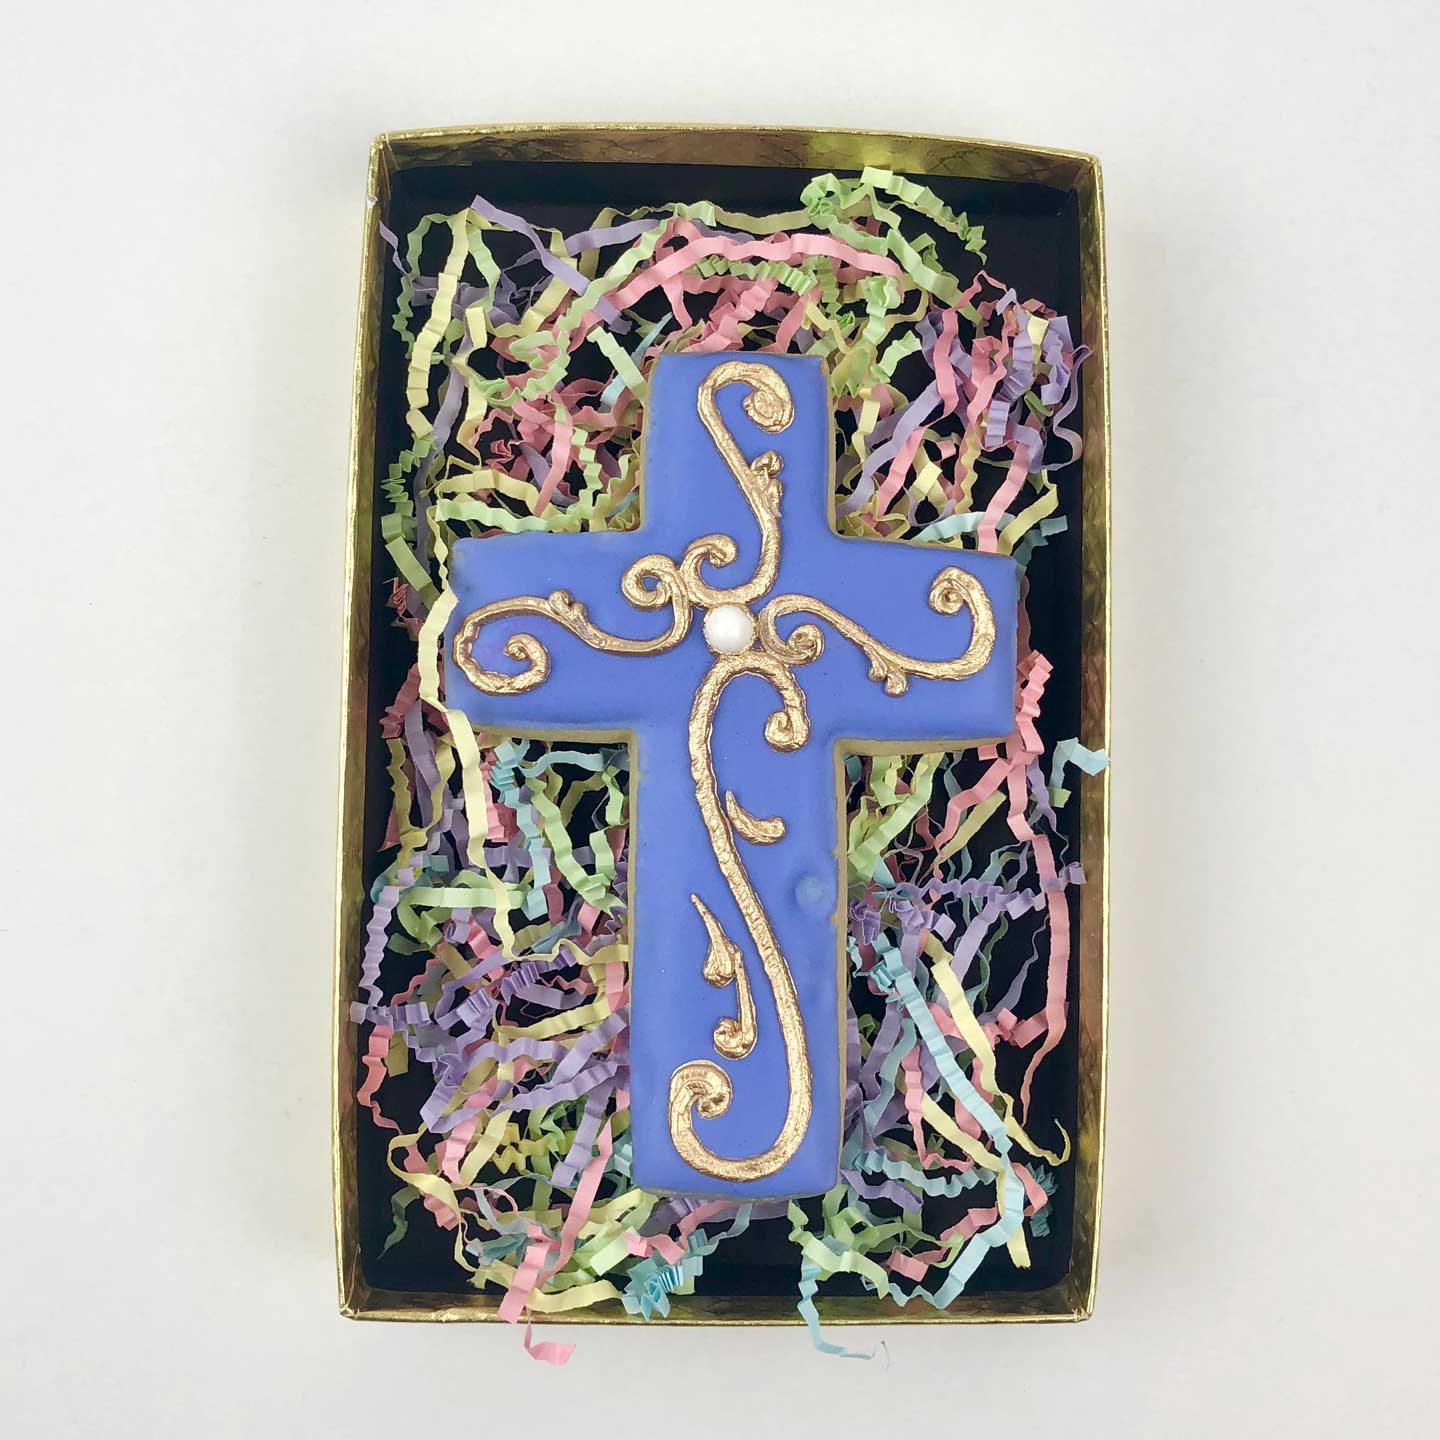 Decorated lavender Cross Cookie in a box